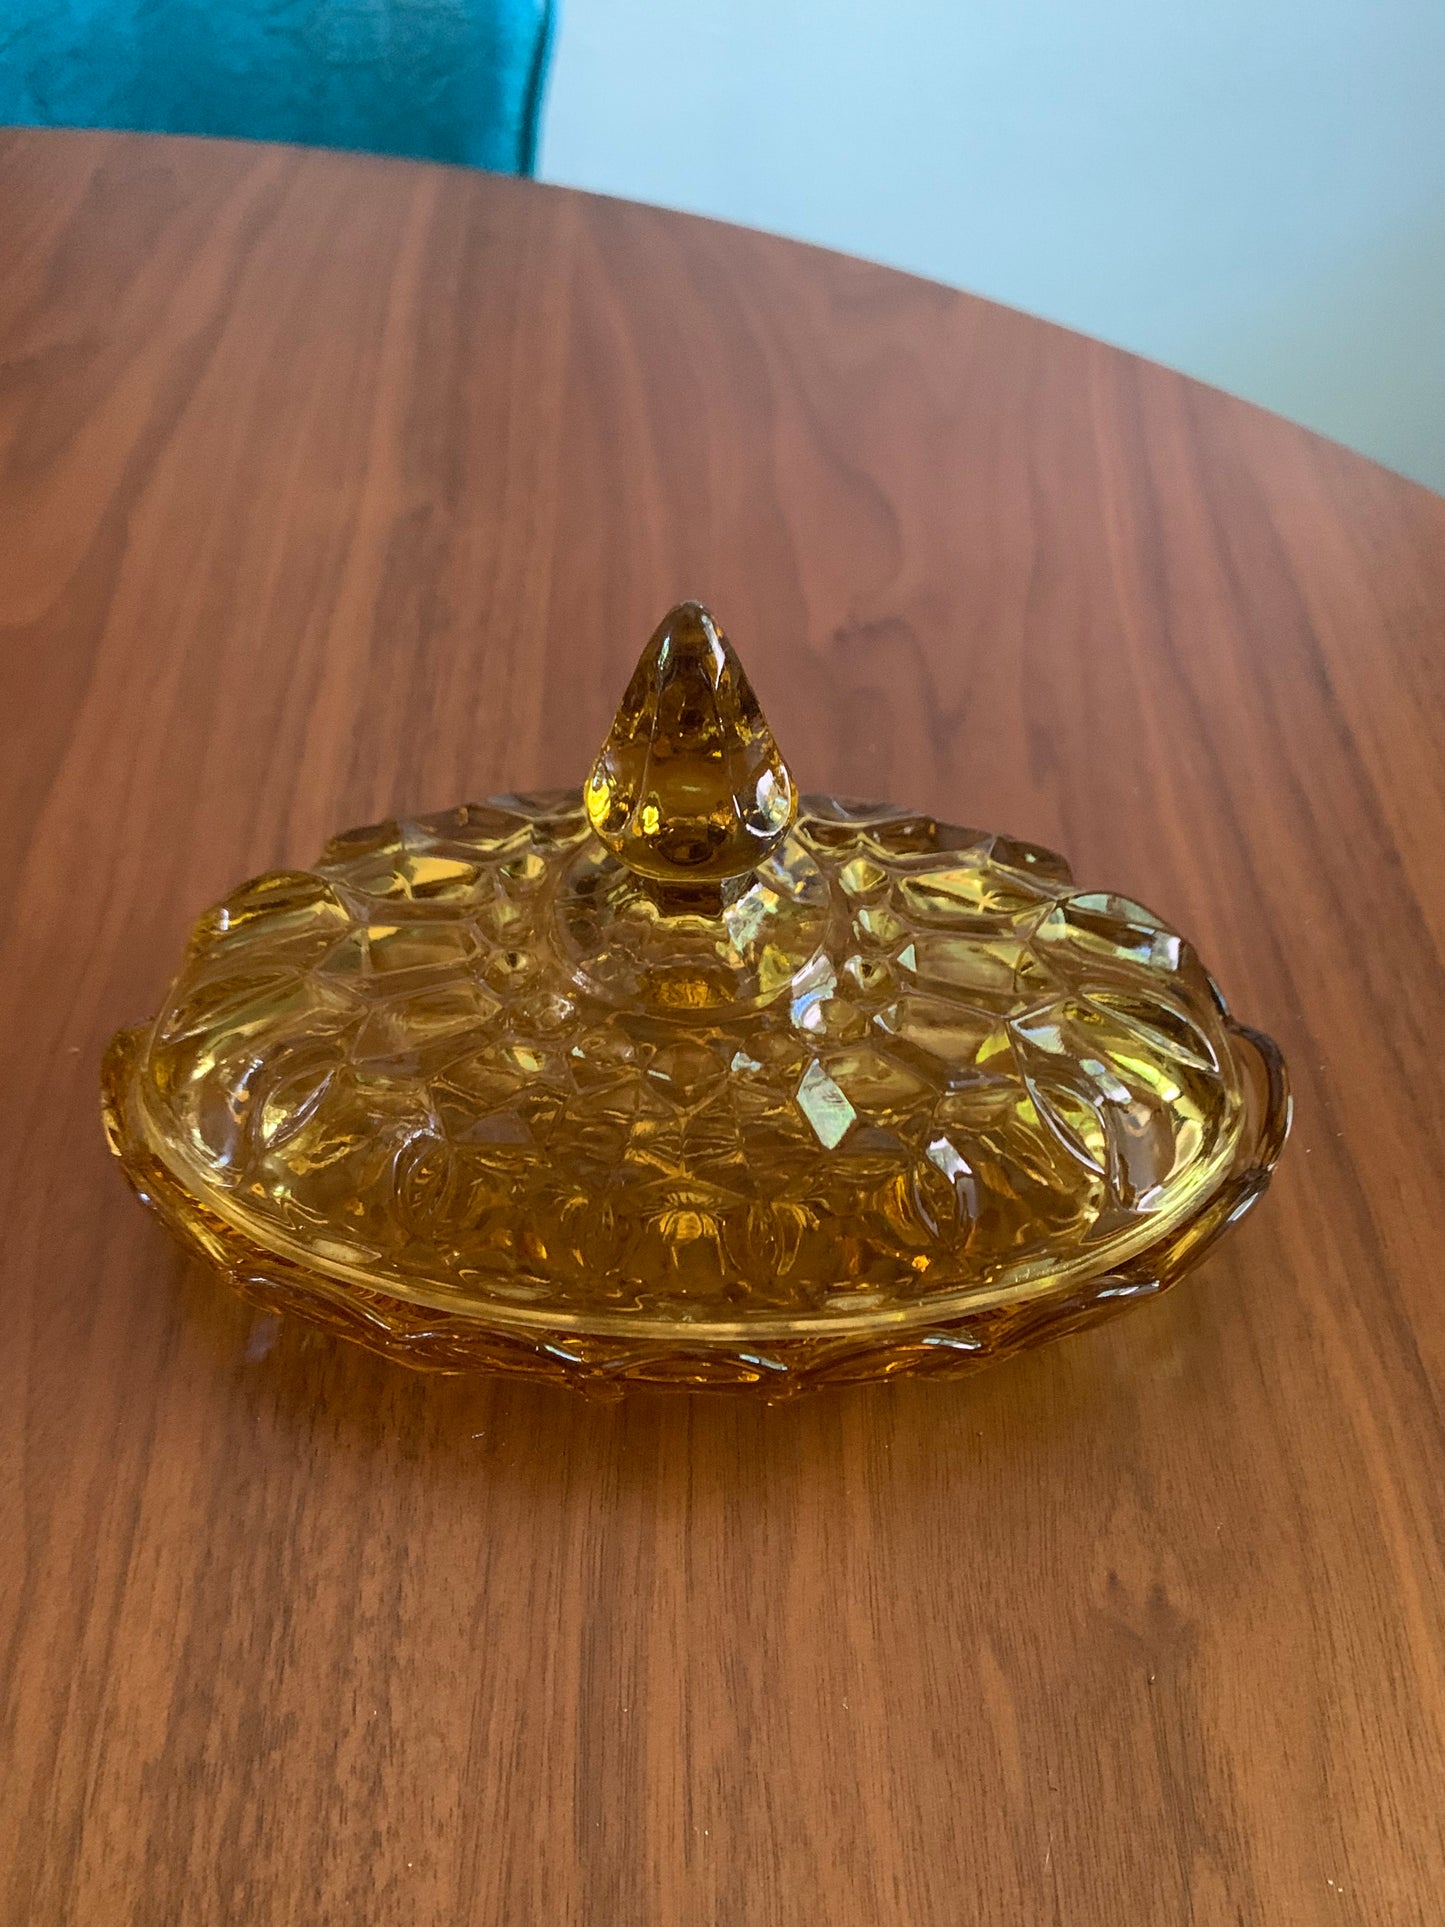 Anchor Hocking Fairfield Amber Covered Dish